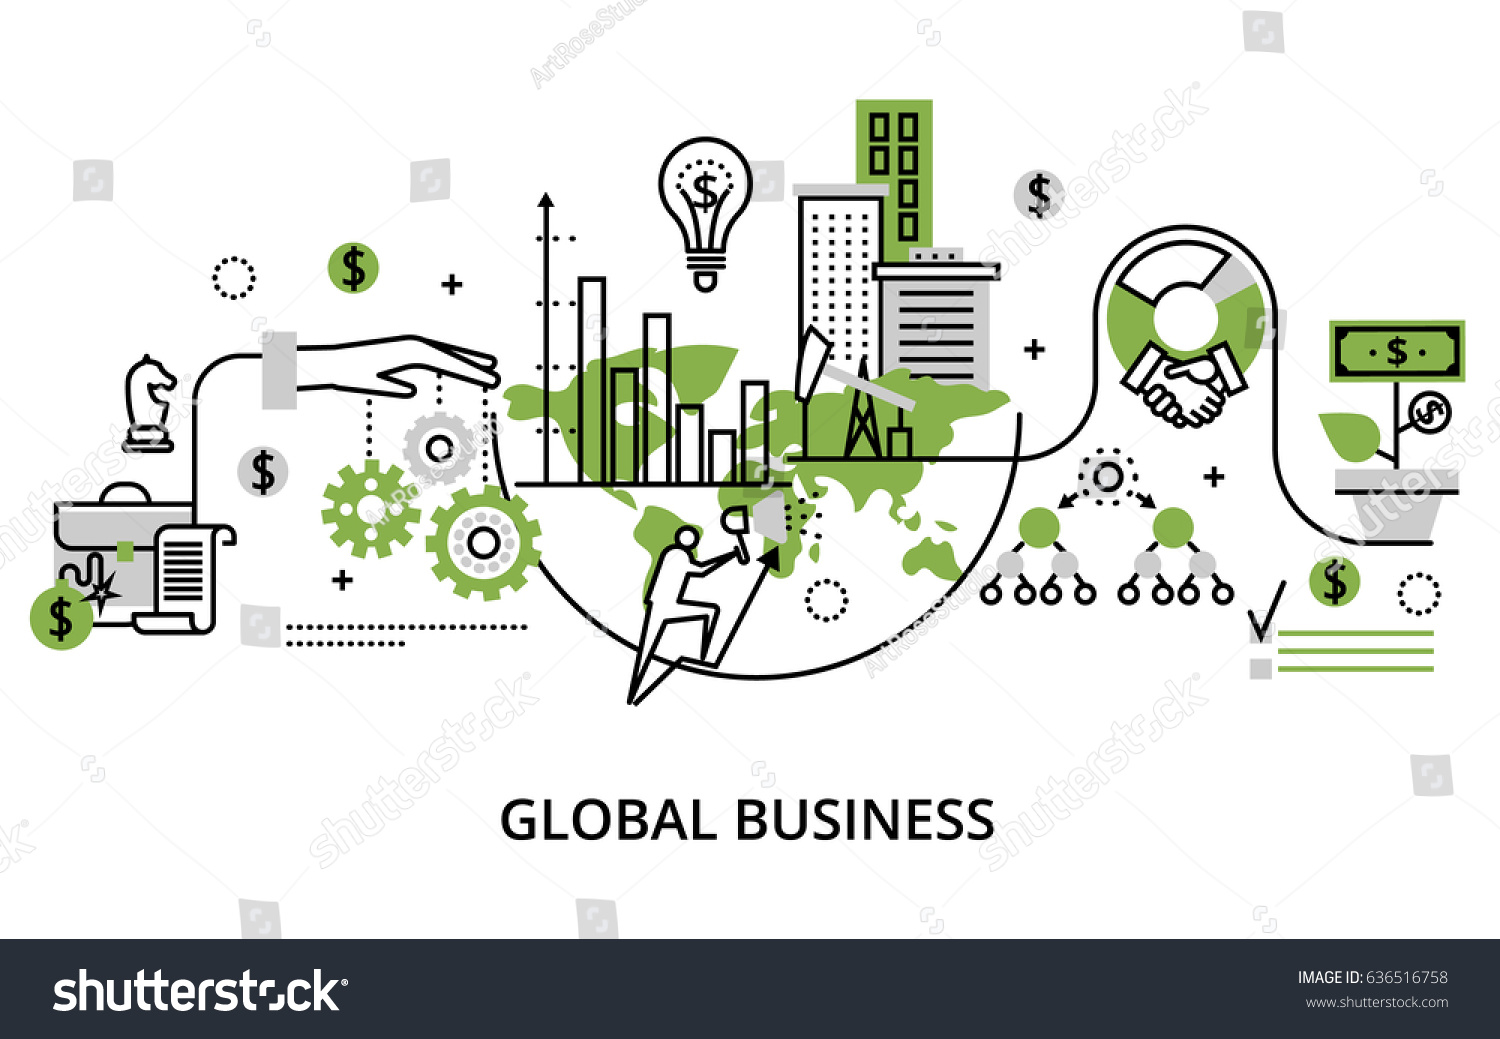 SVG of Modern thin line design vector illustration, concept of global business process and finance success in the world, in greenery color, for graphic and web design svg